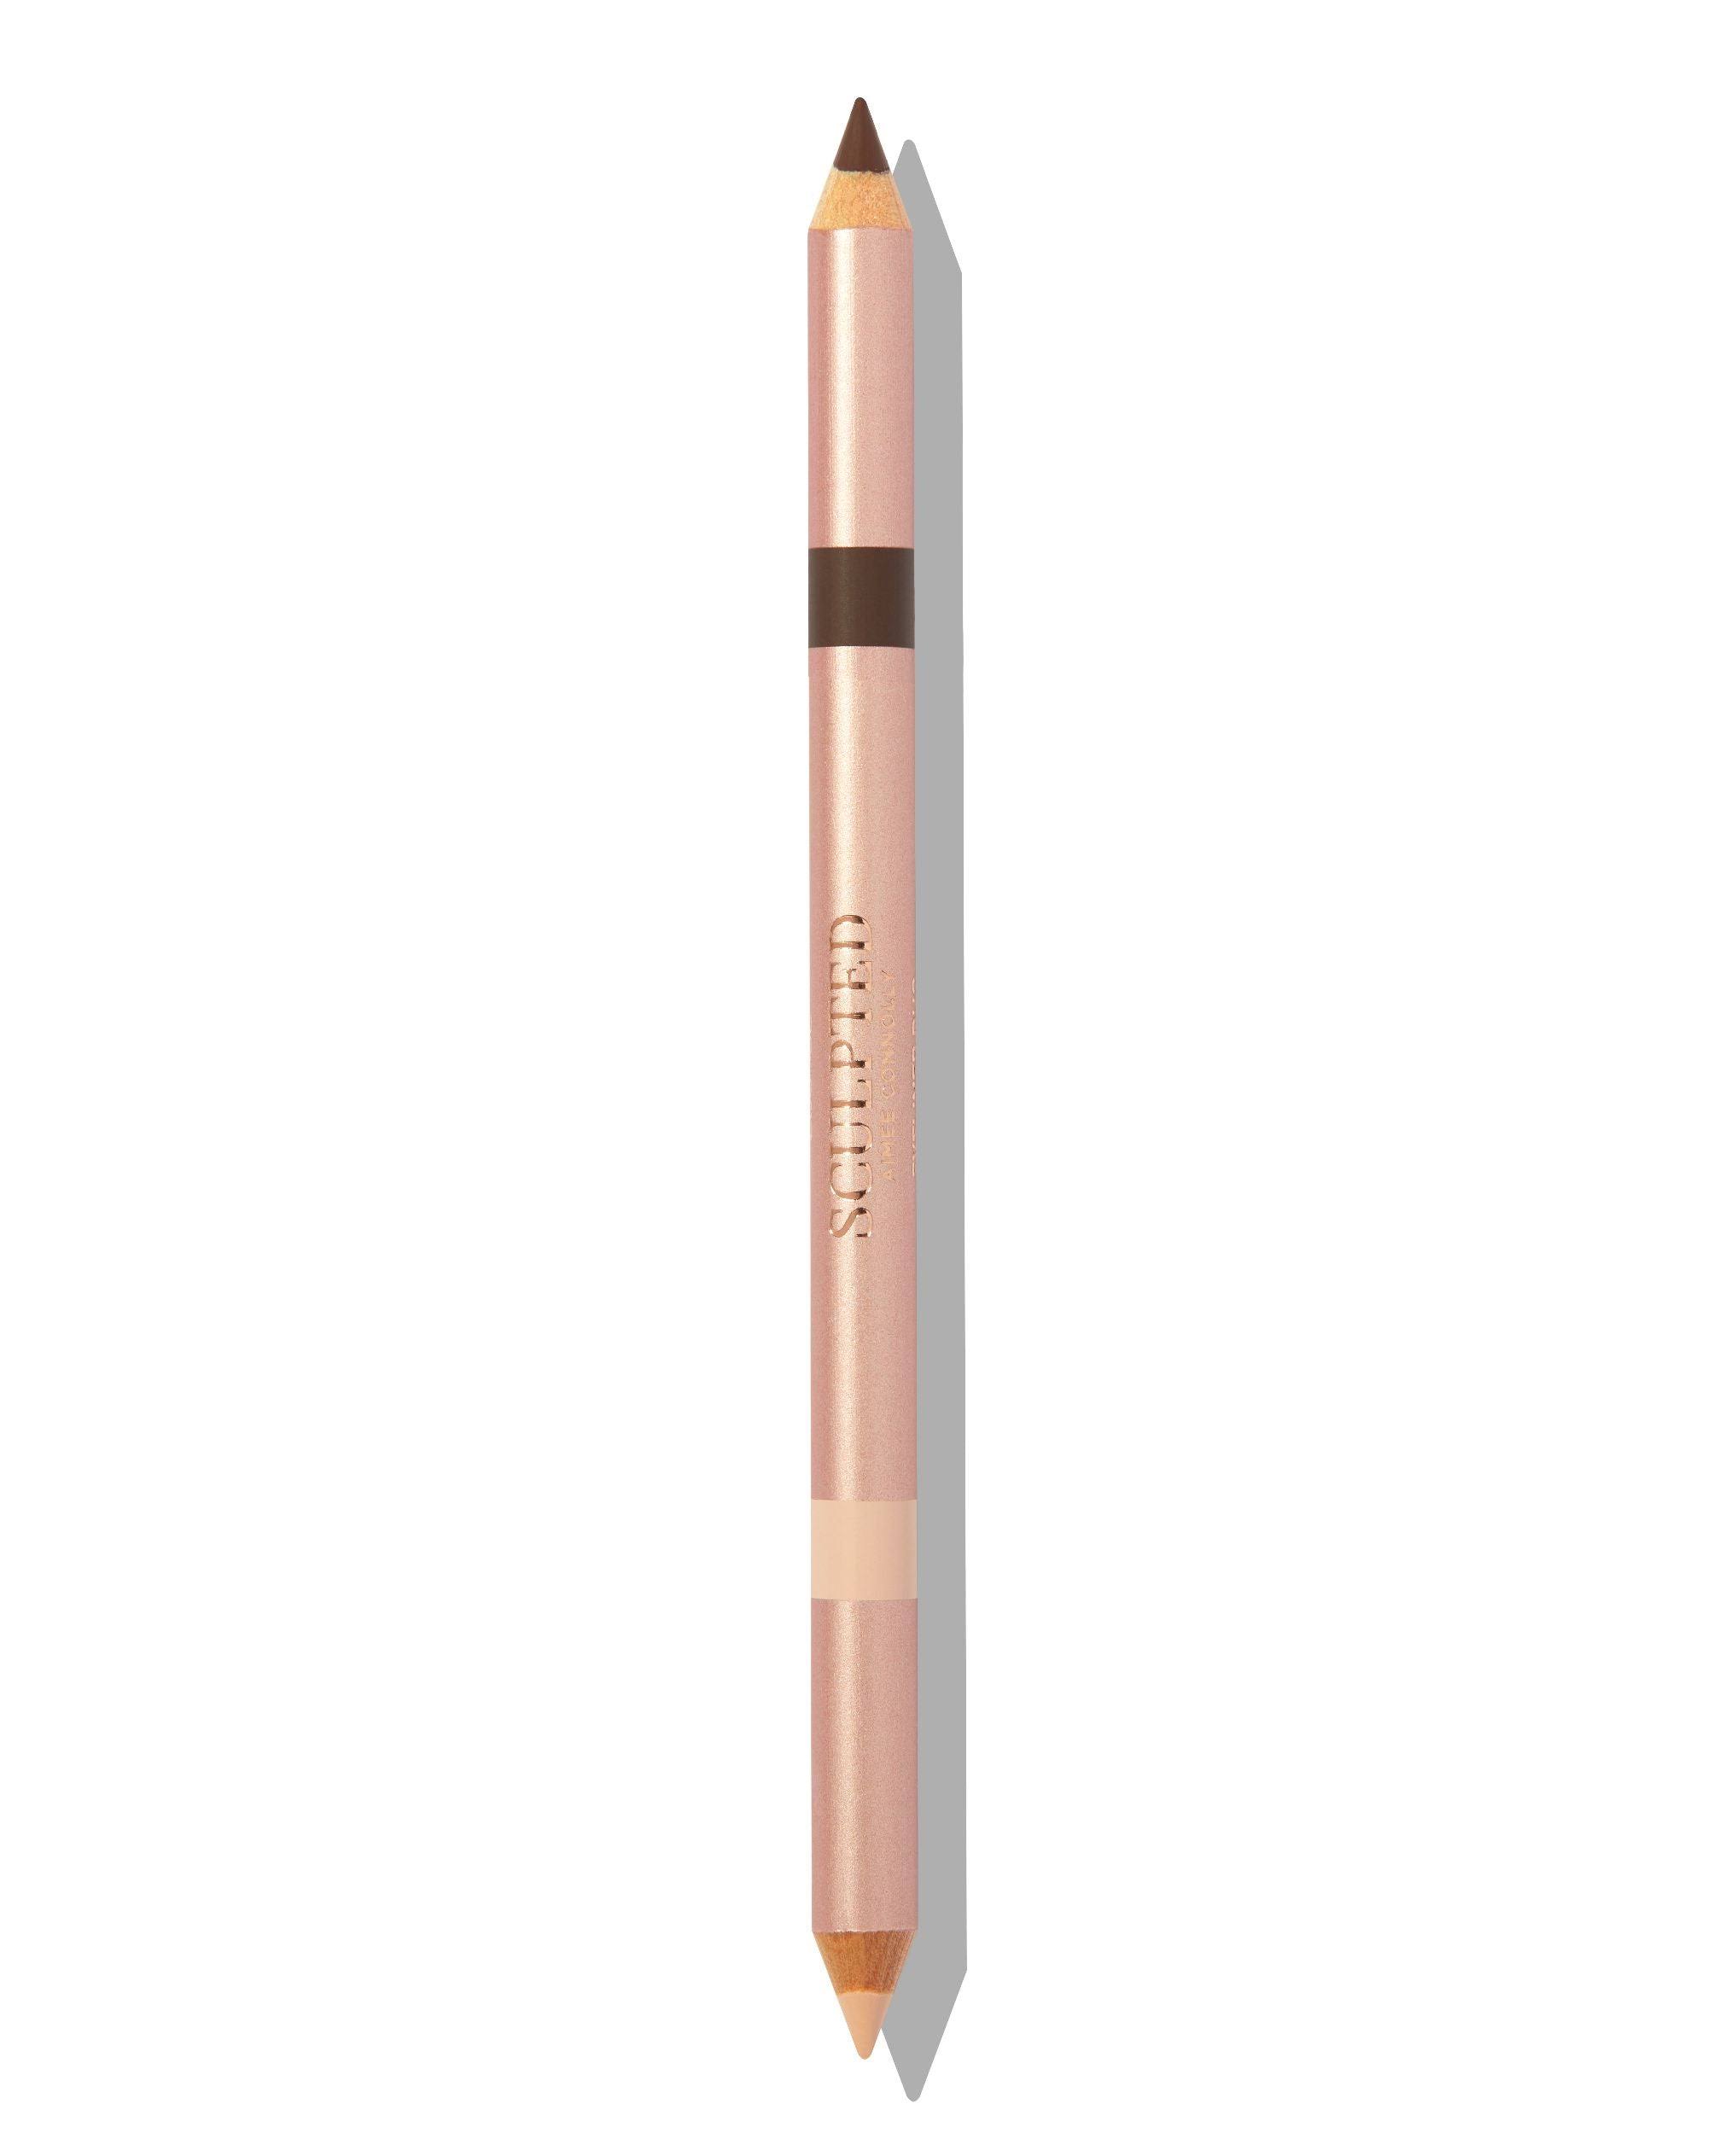 Sculpted By Aimee - Double Ended Kohl Eye Pencil - Brown/Nude